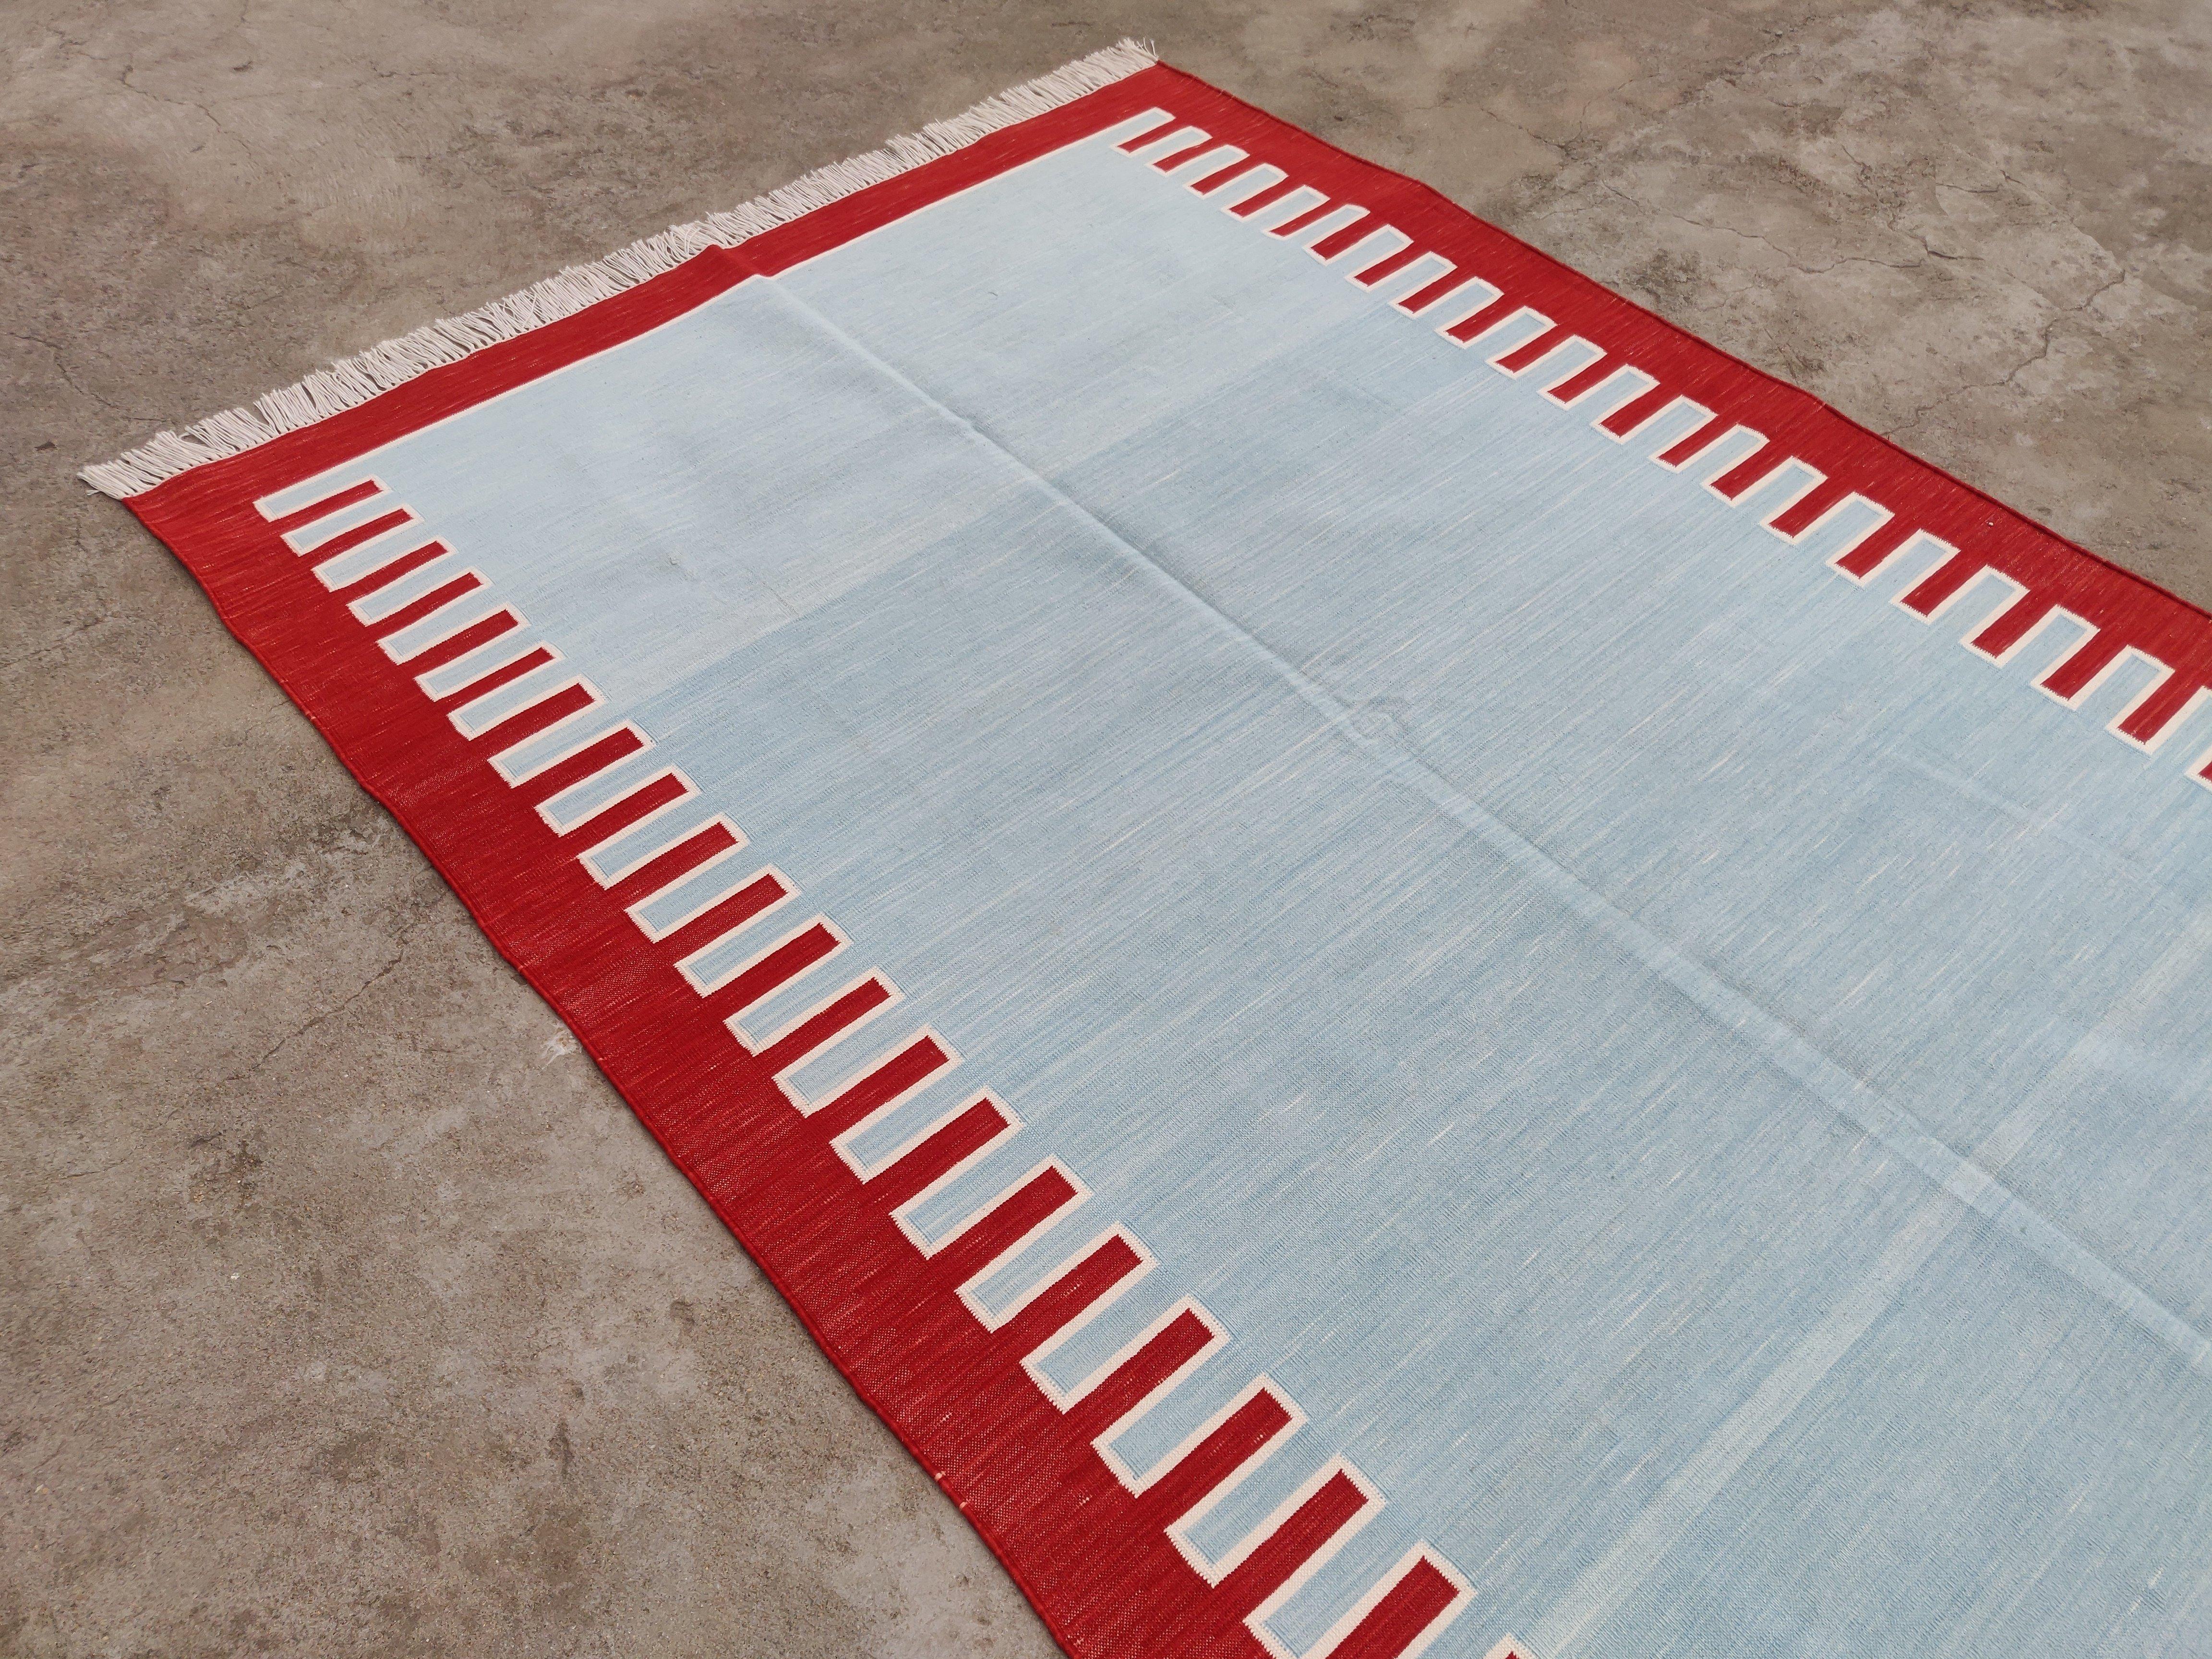 Hand-Woven Handmade Cotton Area Flat Weave Rug, 4x6 Sky Blue And Red Striped Indian Dhurrie For Sale